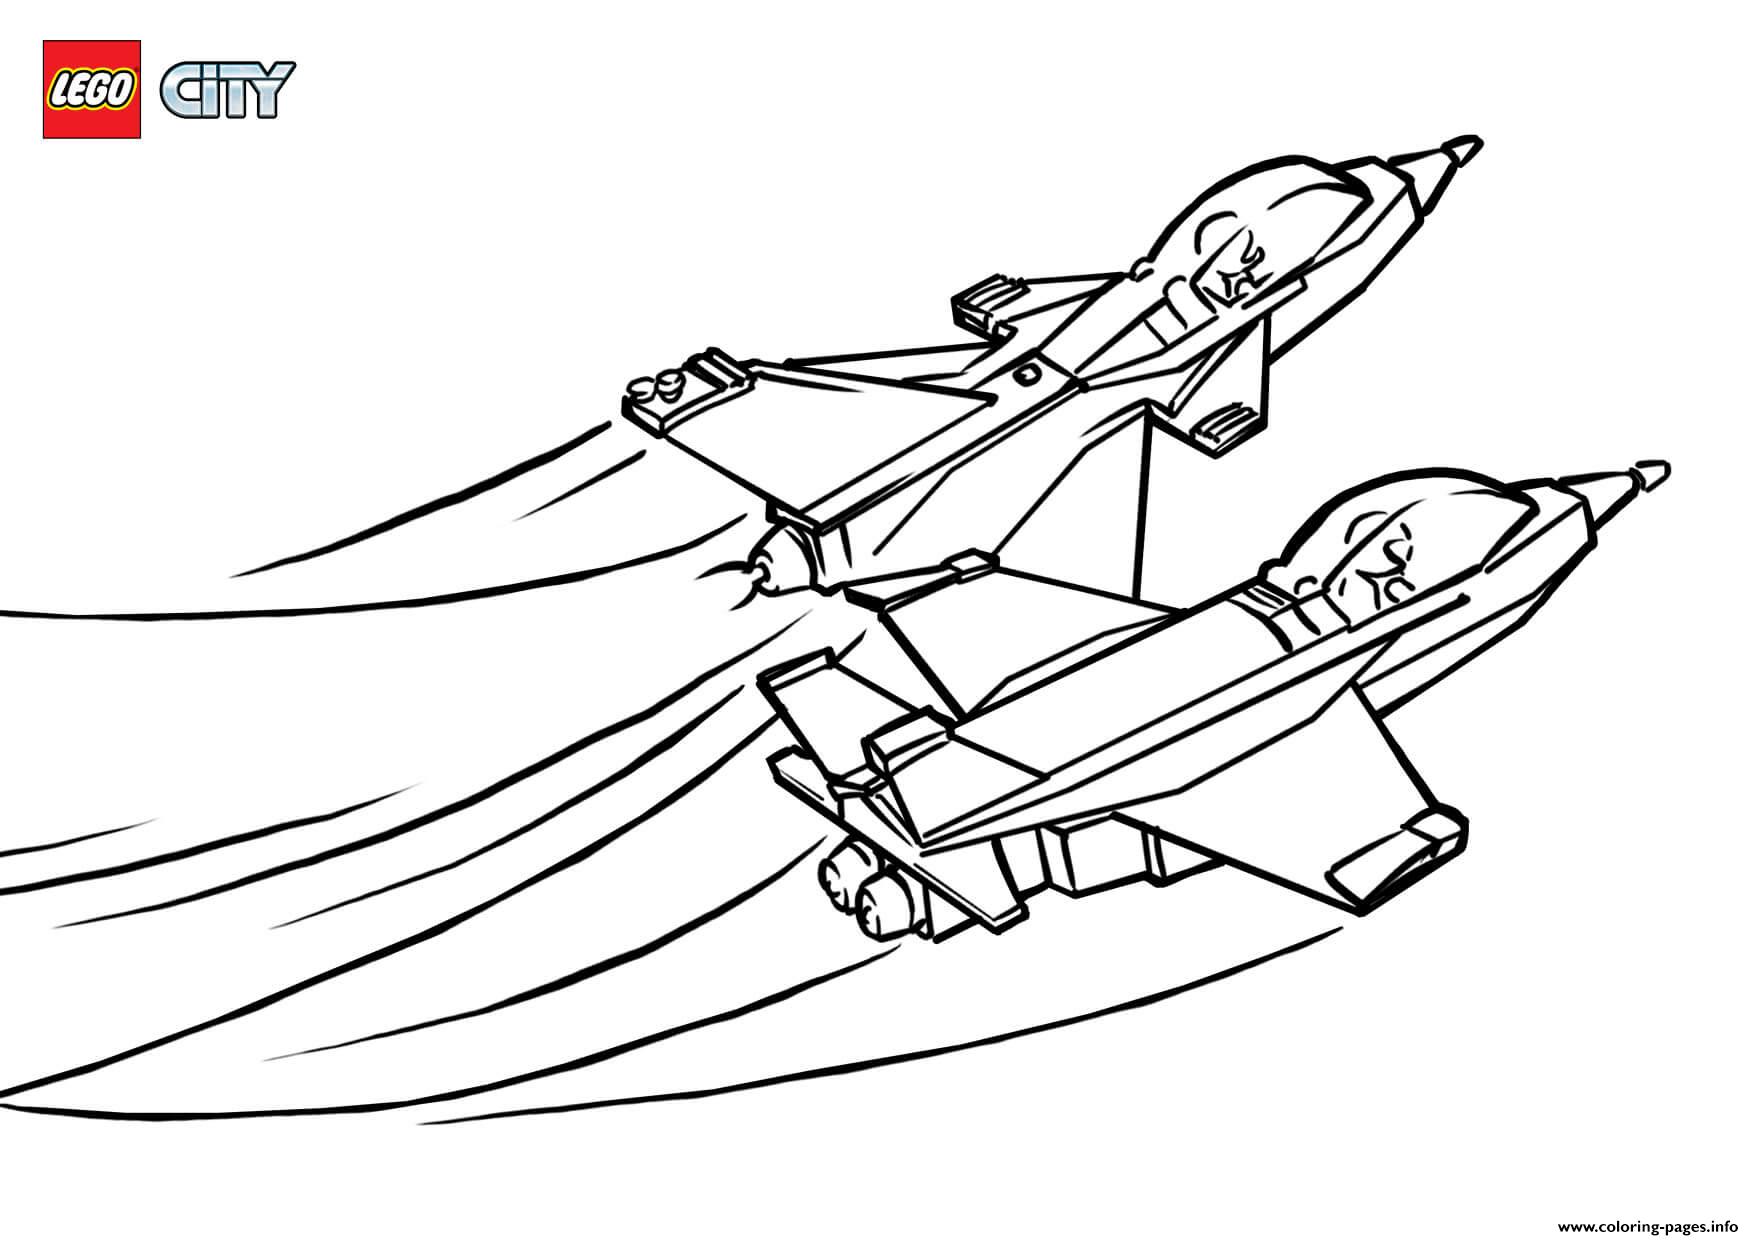 Lego City Jet Airport Coloring Pages Printable